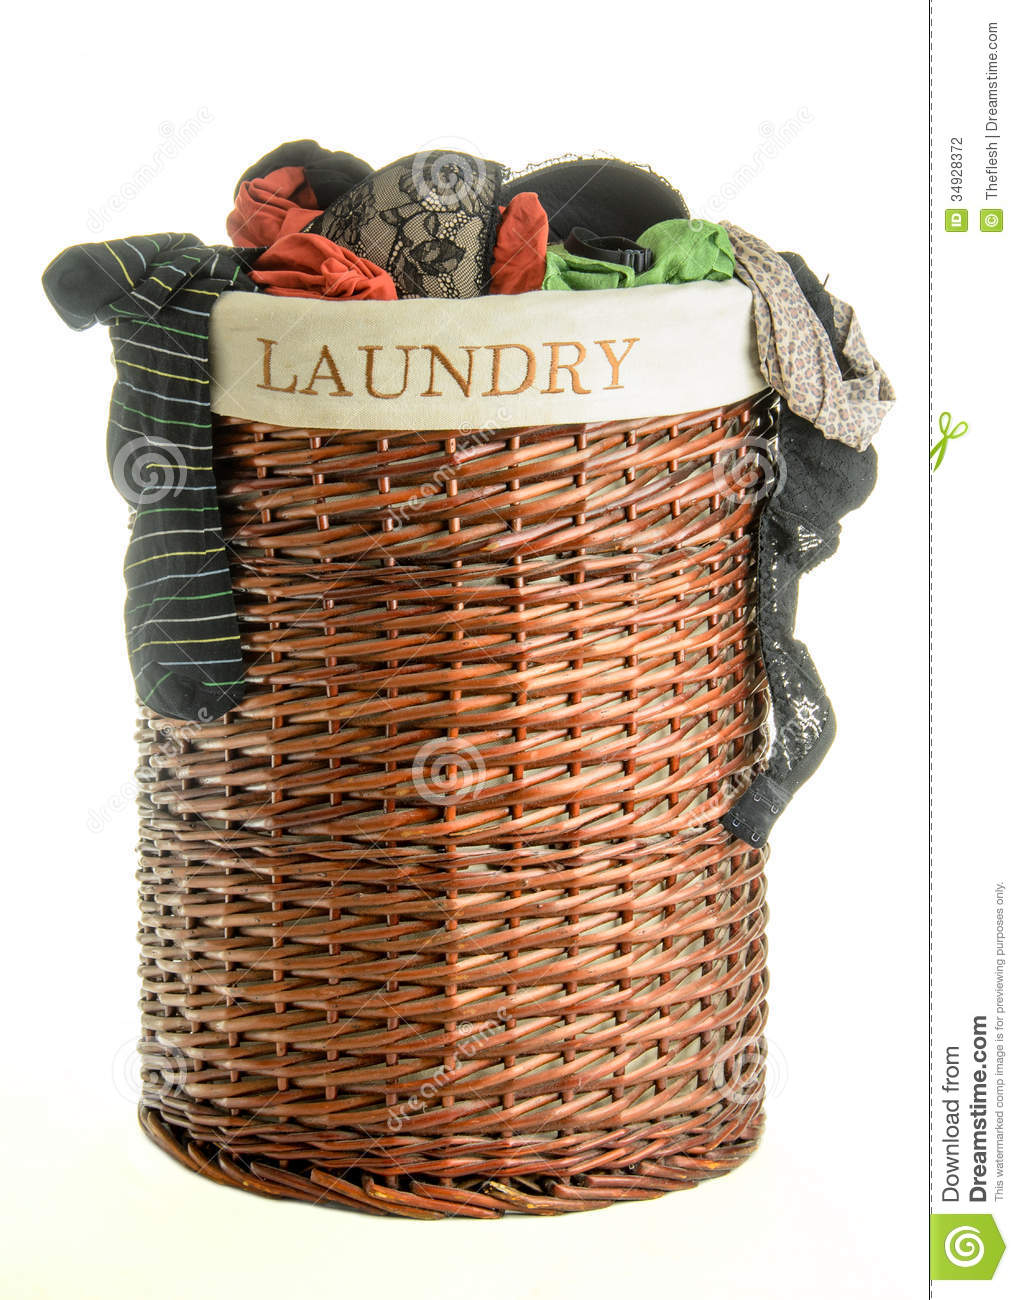 Laundry Hamper Clipart Laundry Basket With Clothes